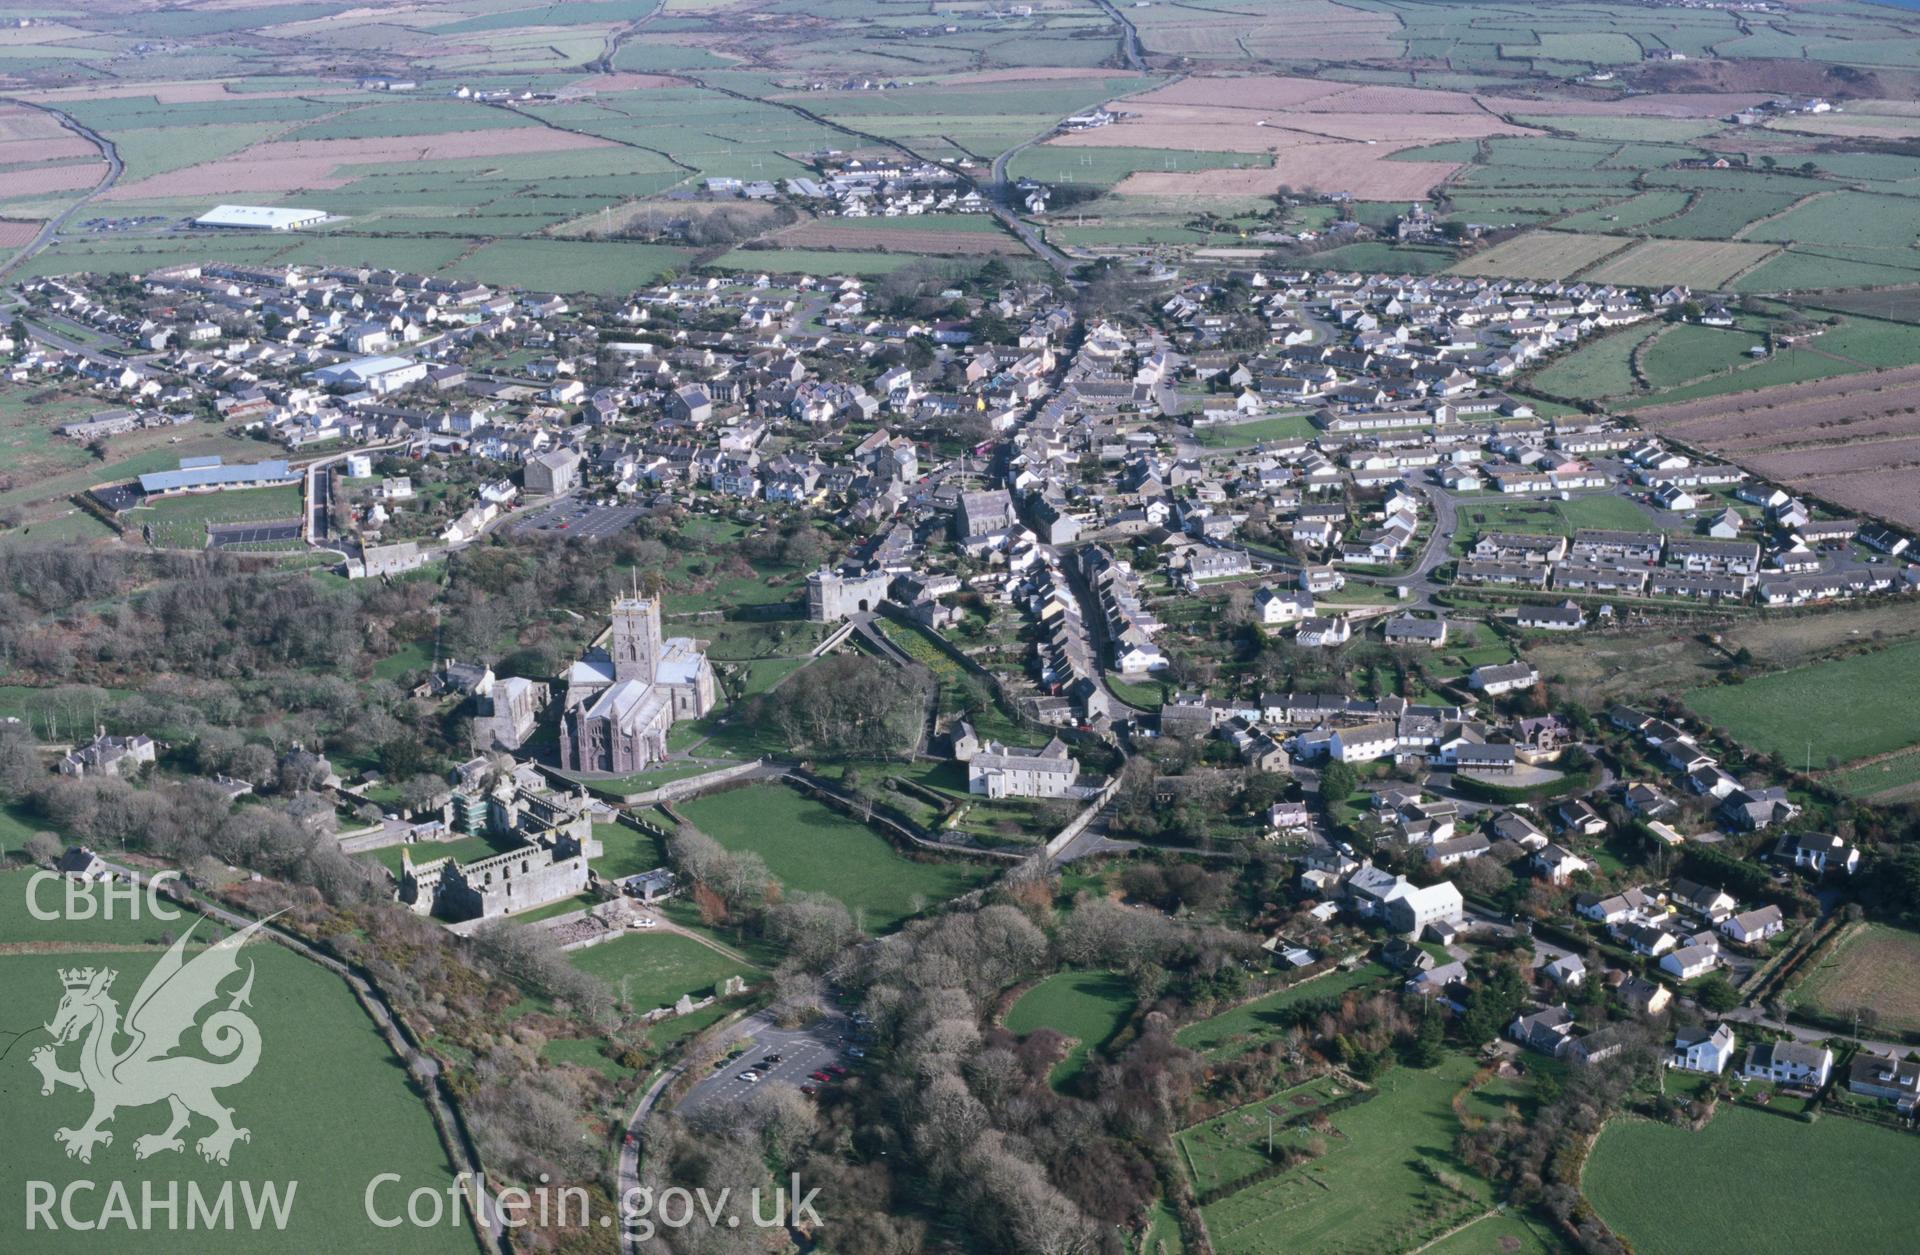 Slide of RCAHMW colour oblique aerial photograph of St Davids, taken by T.G. Driver, 5/3/2002.